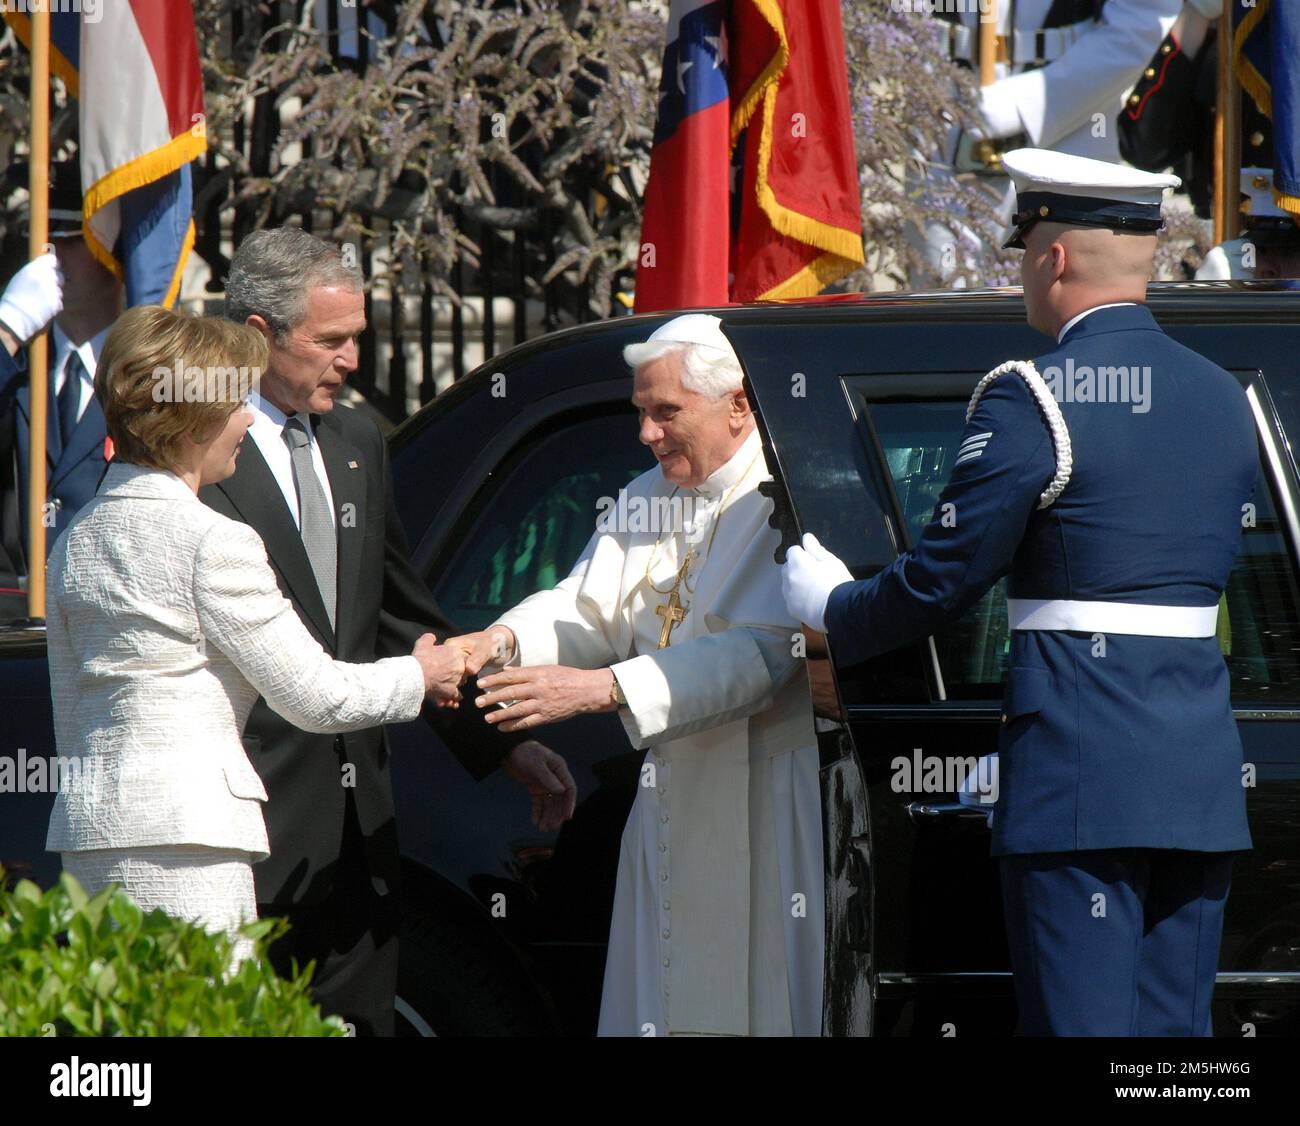 Washington, United States Of America. 16th Apr, 2008. Pope Benedict XVI, right, is greeted by first lady Laura Bush, left, and United States President George W. Bush, center as he arrives at the White House in Washington, DC on Wednesday, April 16, 2008. Credit: Ron Sachs/CNP/Sipa USA.(RESTRICTION: NO New York or New Jersey Newspapers or newspapers within a 75 mile radius of New York City) Credit: Sipa USA/Alamy Live News Stock Photo